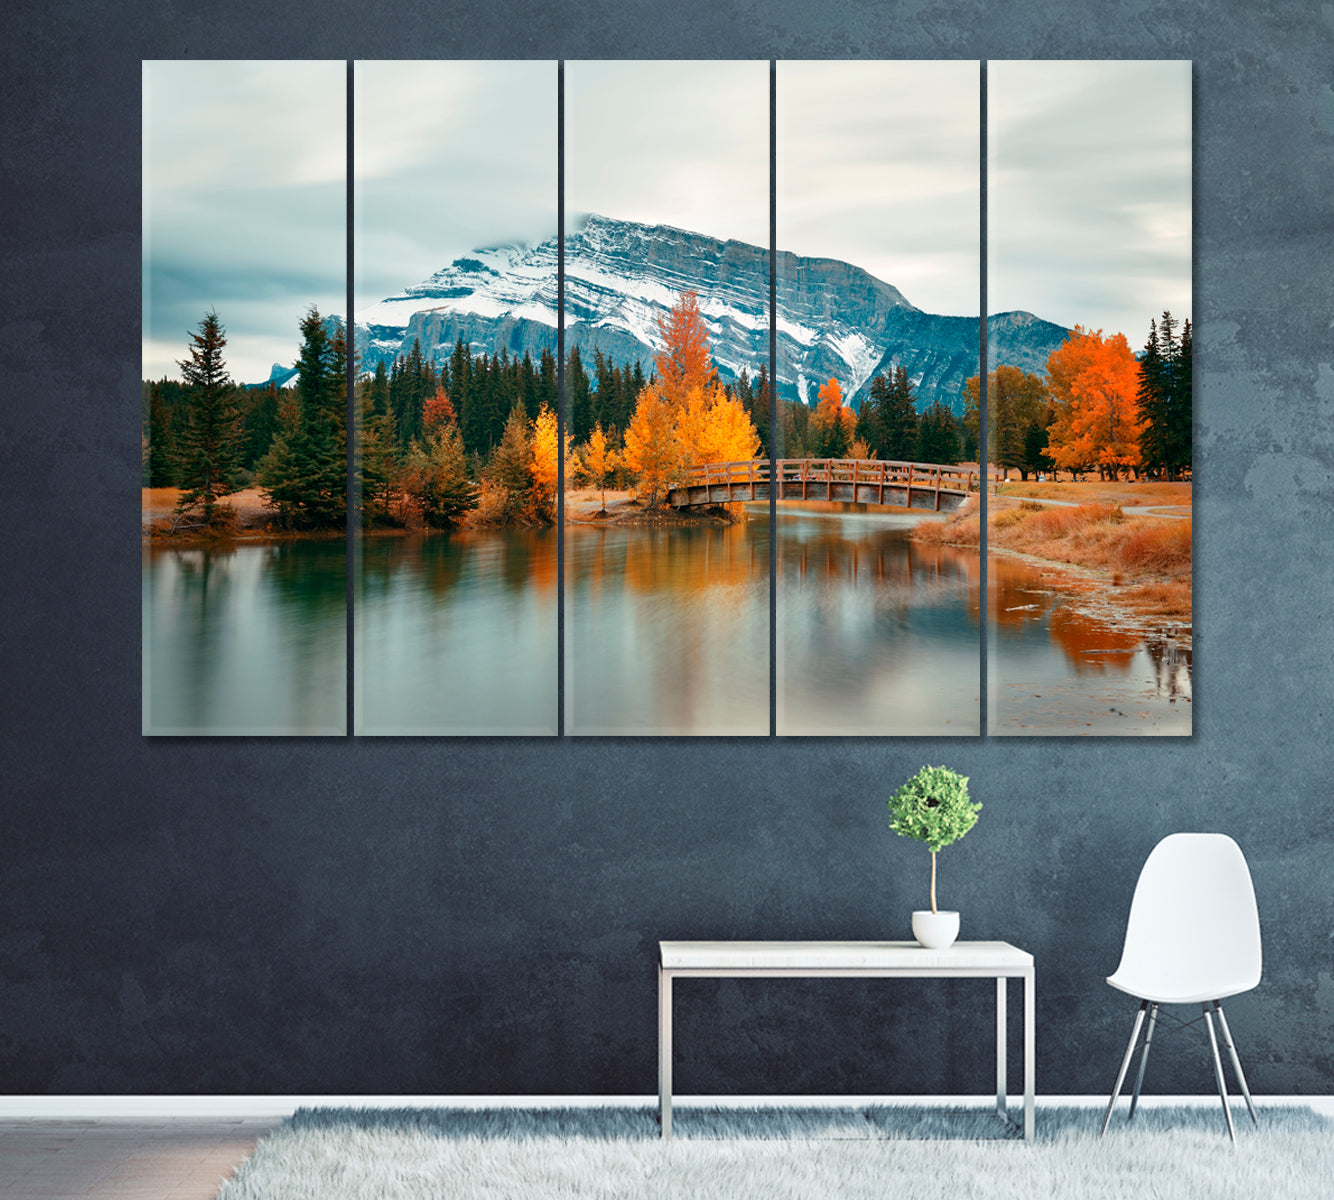 Two Jack Lake Banff National Park Canada Canvas Print ArtLexy 5 Panels 36"x24" inches 